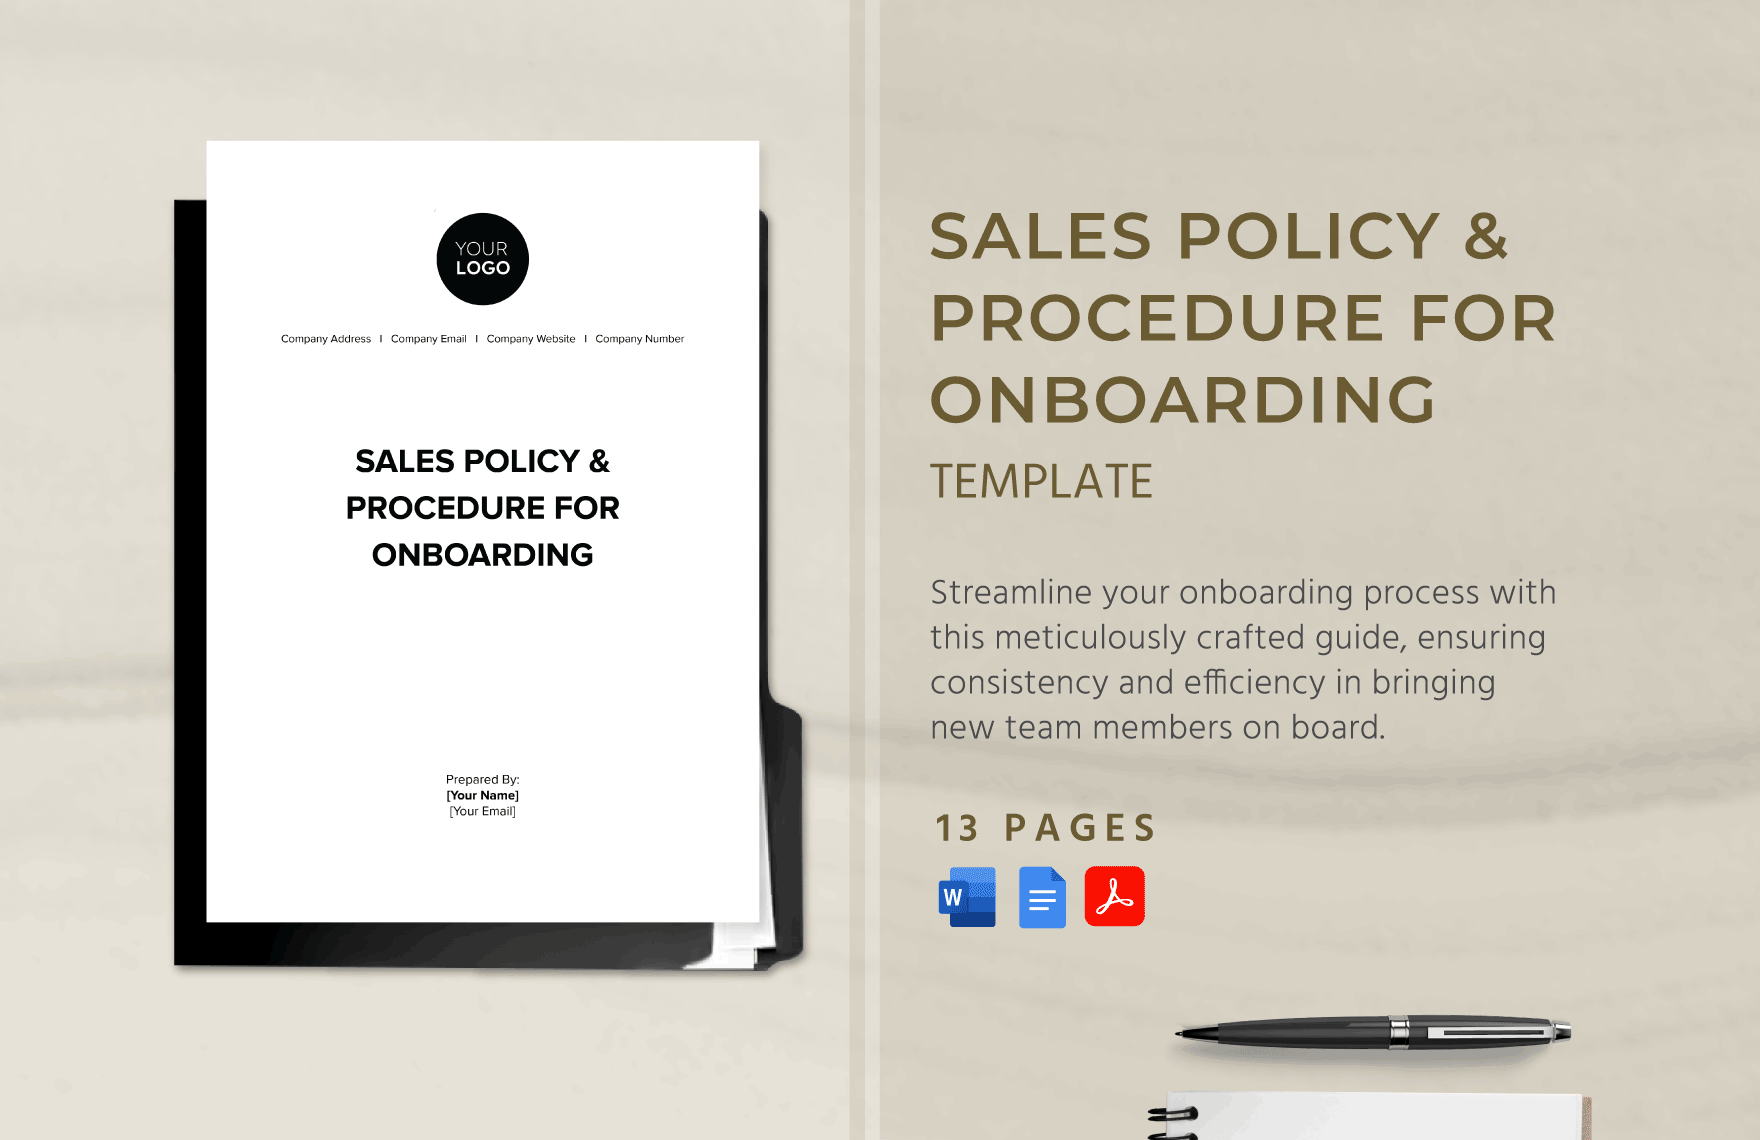 Sales Policy & Procedure for Onboarding Template